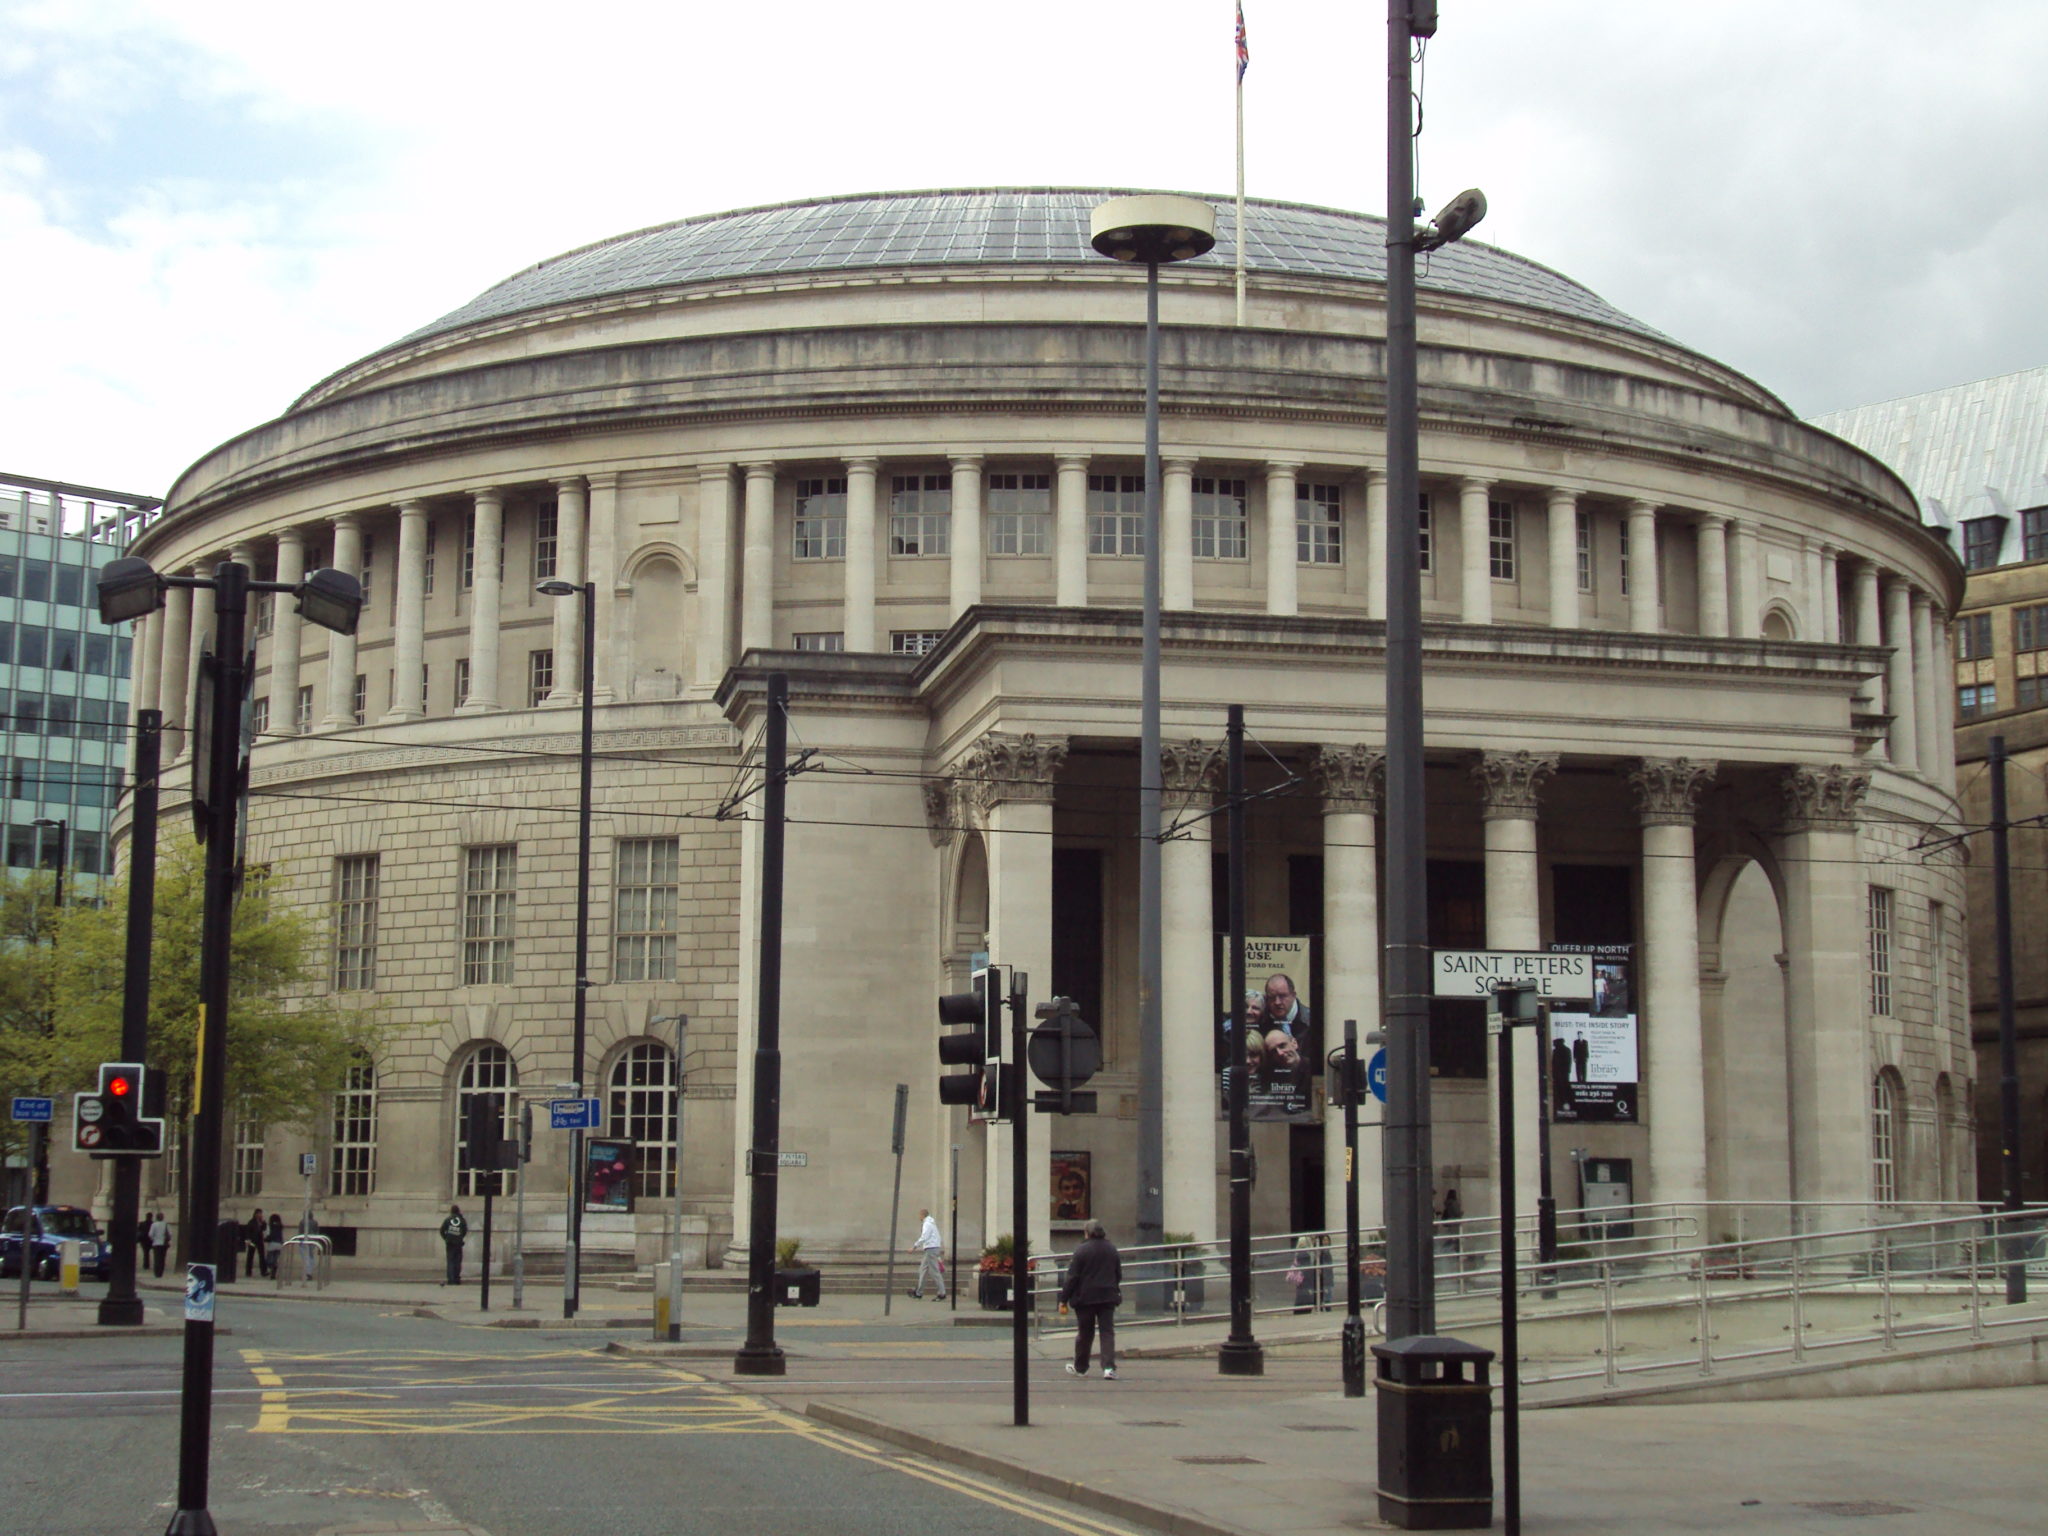 Central Library Manchester